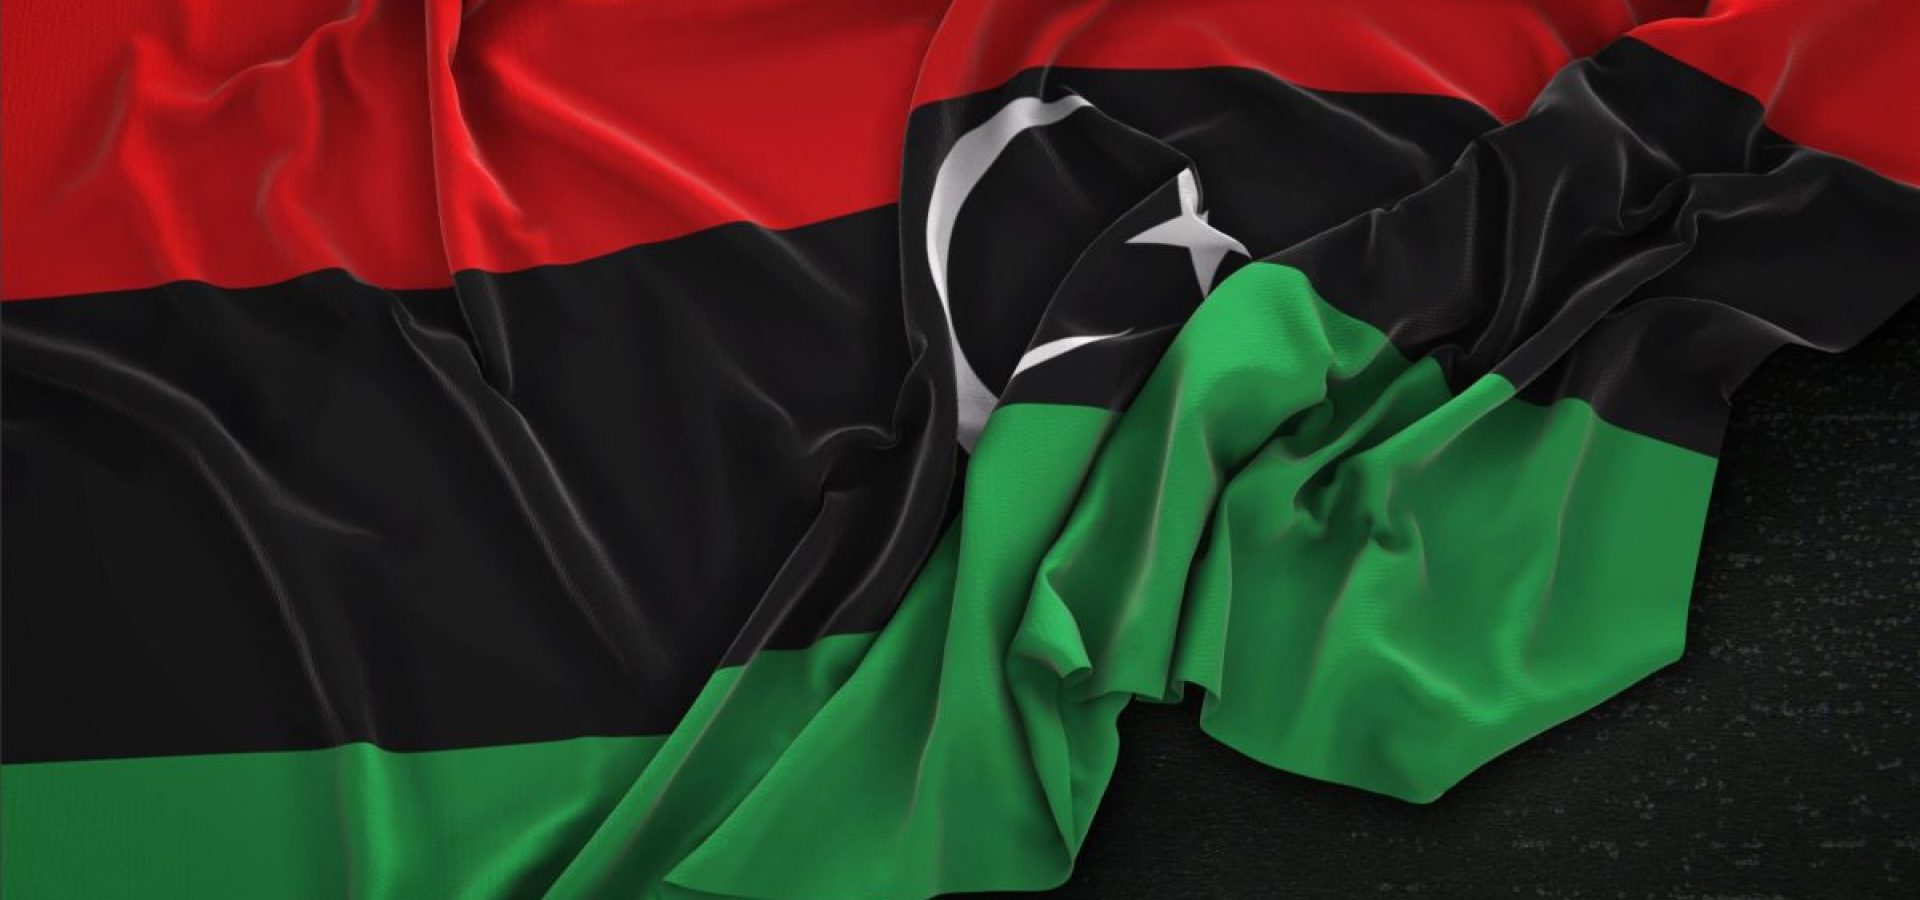 Libya and its oil industry